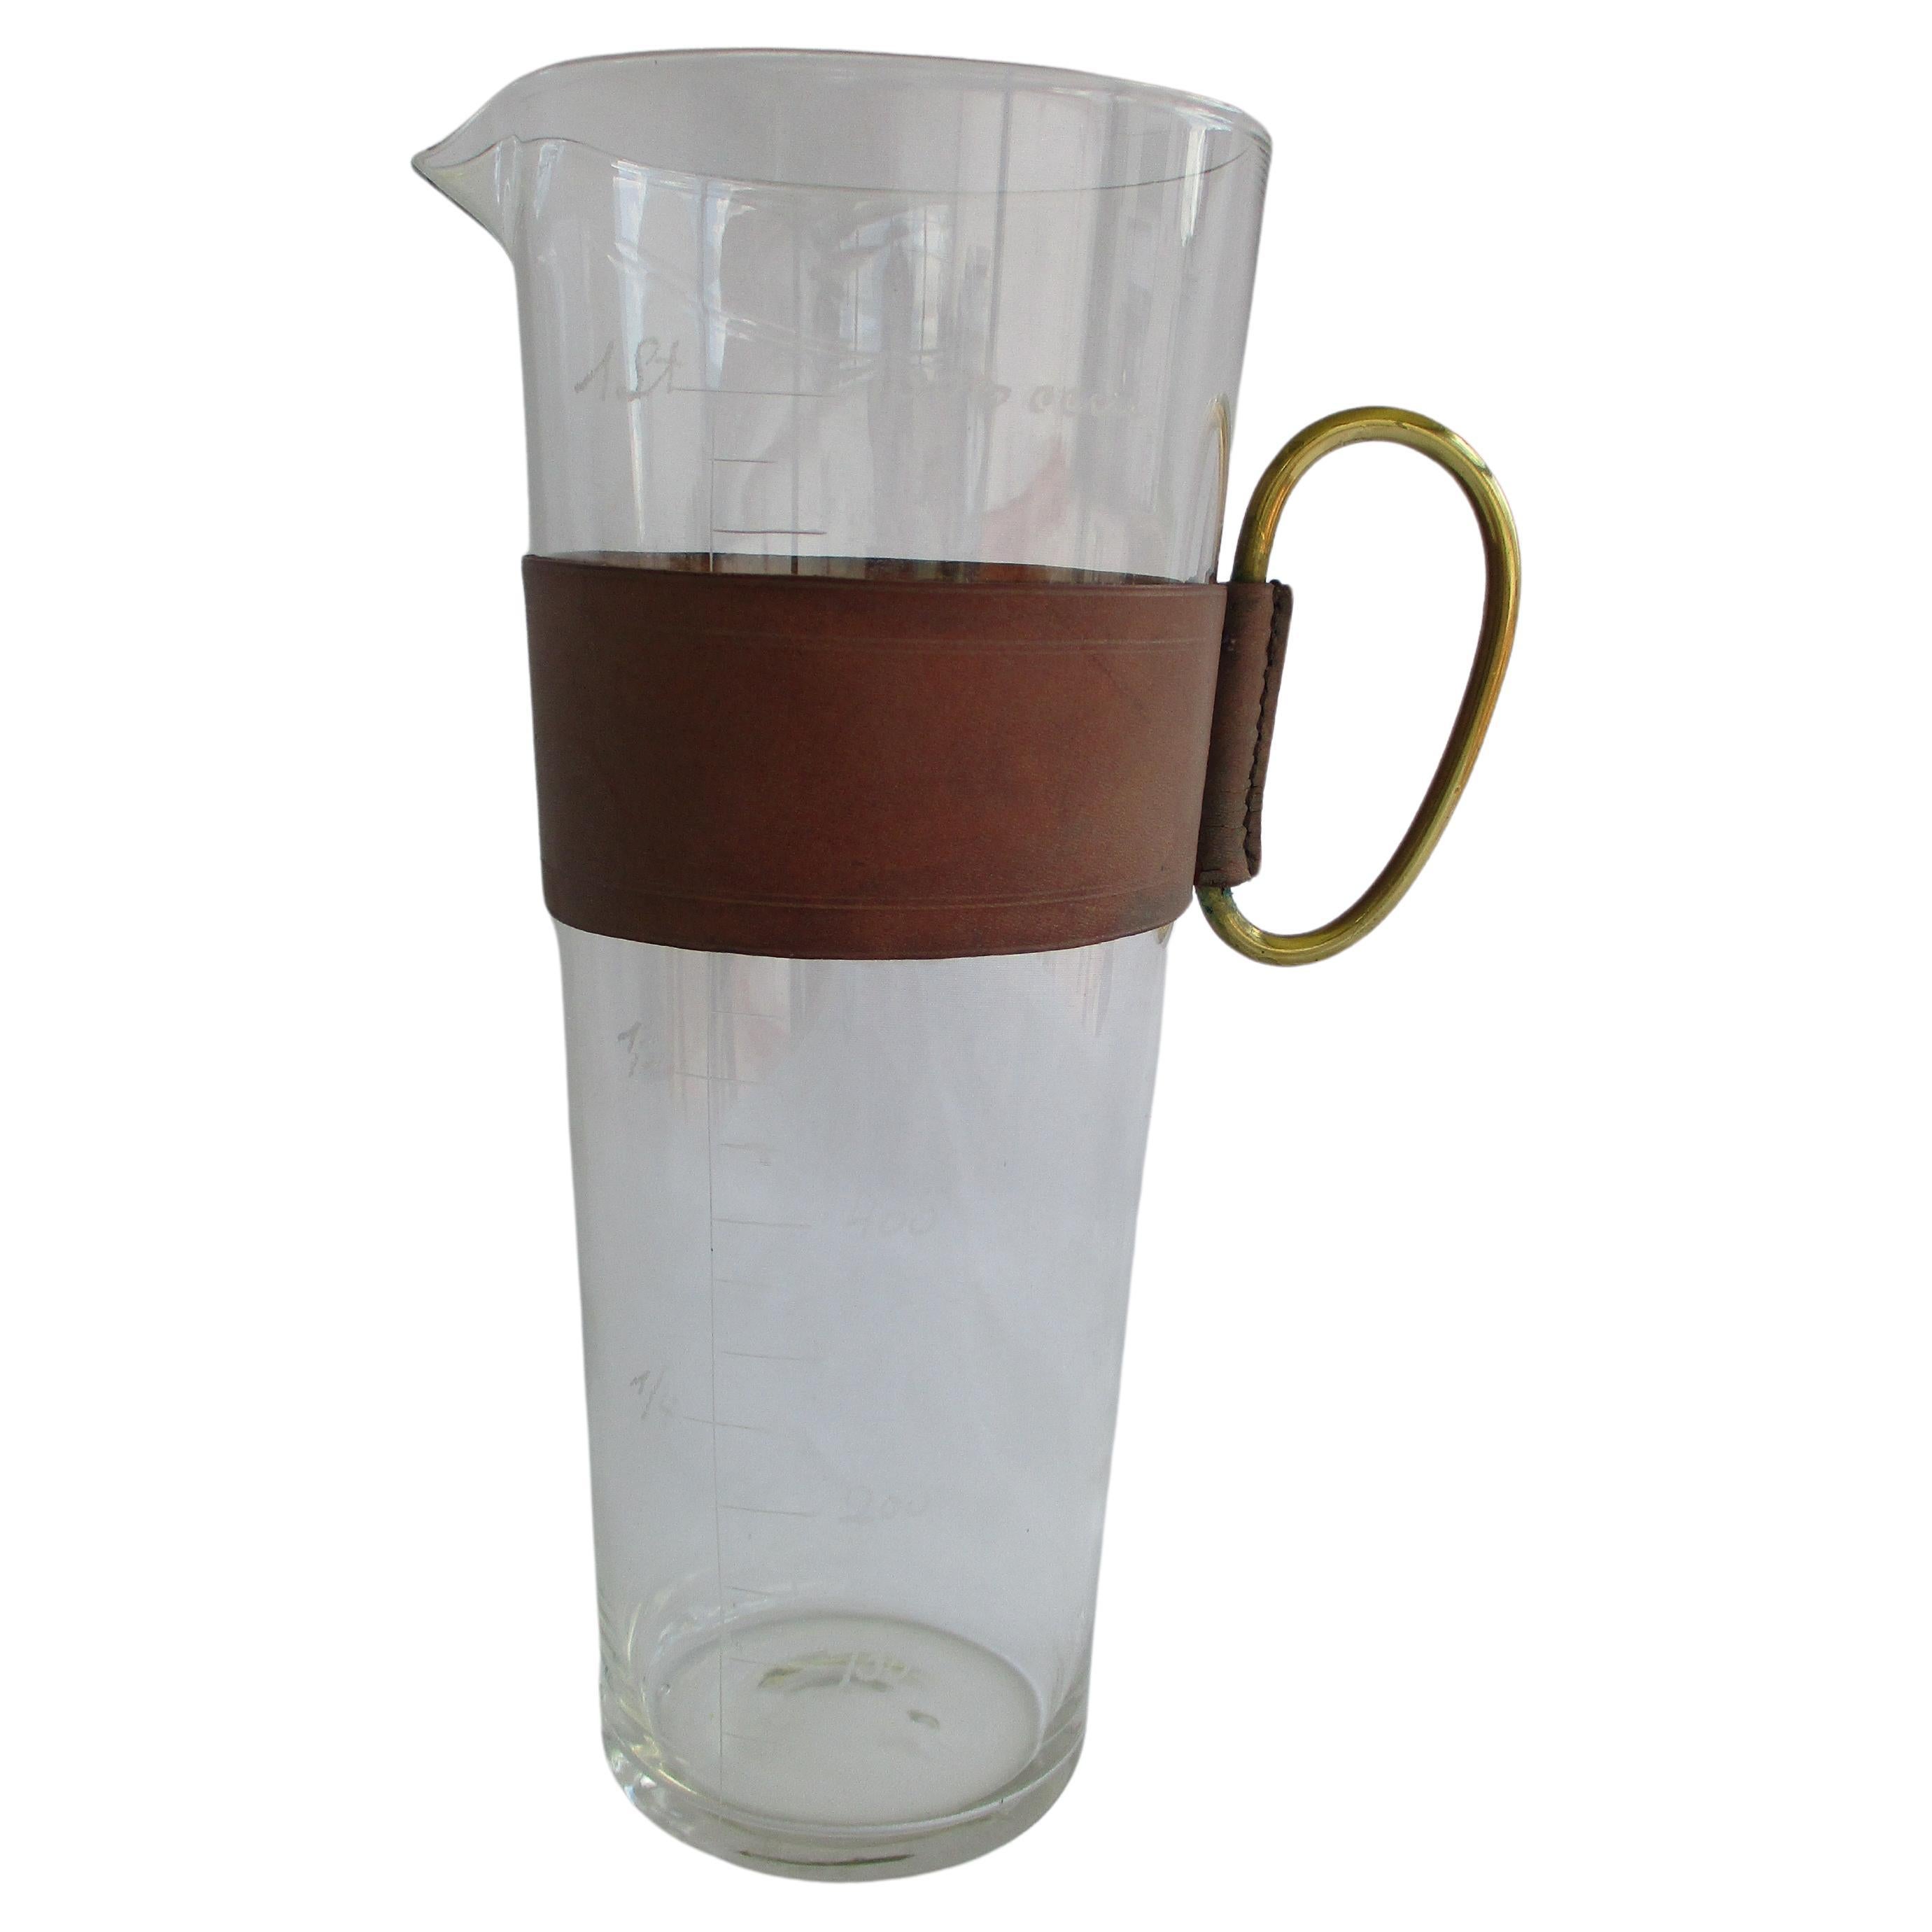 Original Aubock glass carafe with a leather cuff and brass handle For Sale